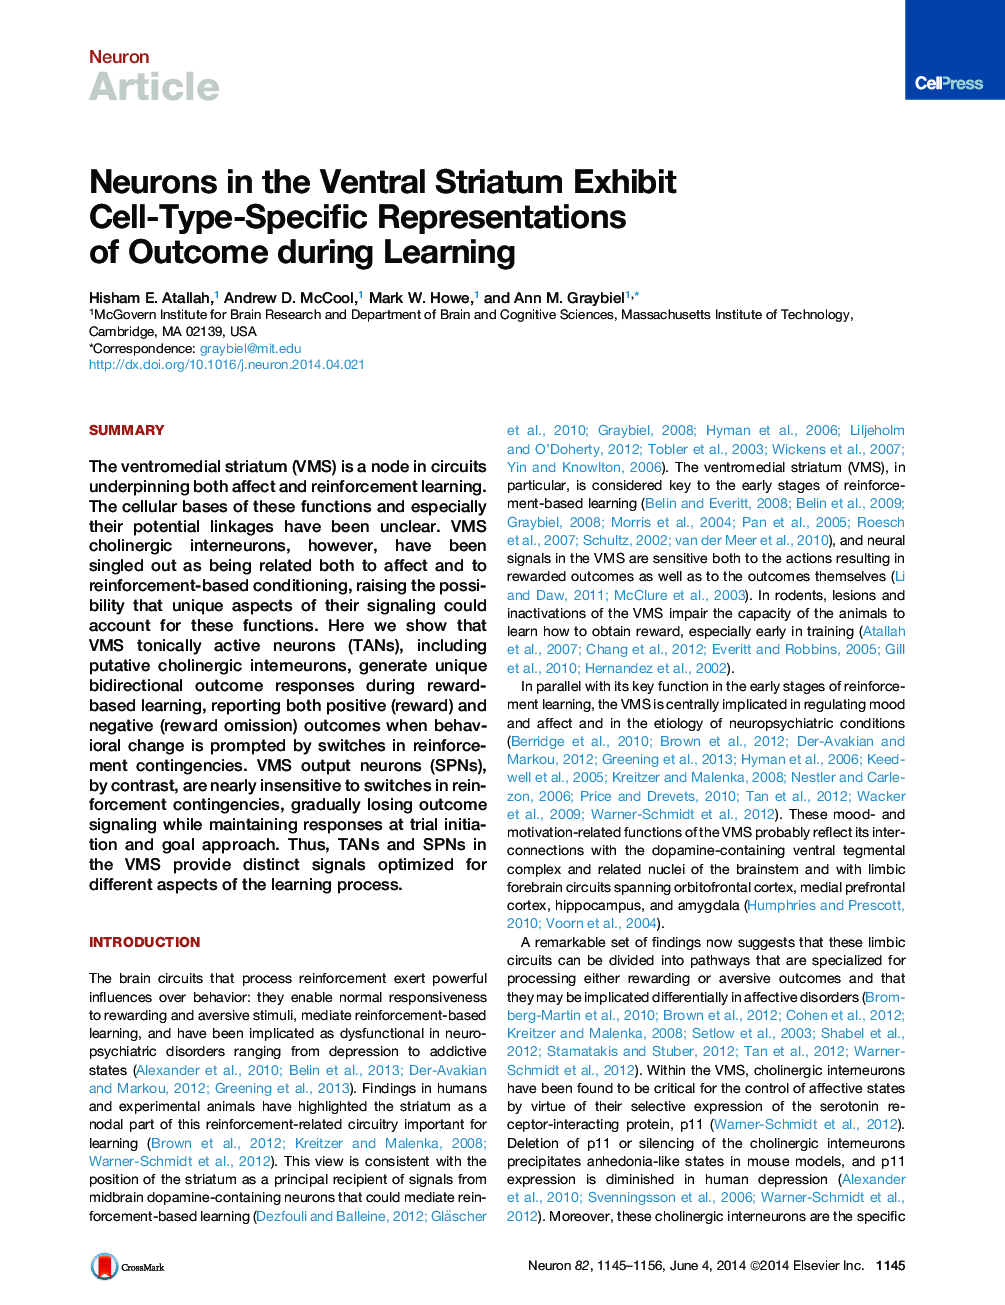 Neurons in the Ventral Striatum Exhibit Cell-Type-Specific Representations of Outcome during Learning